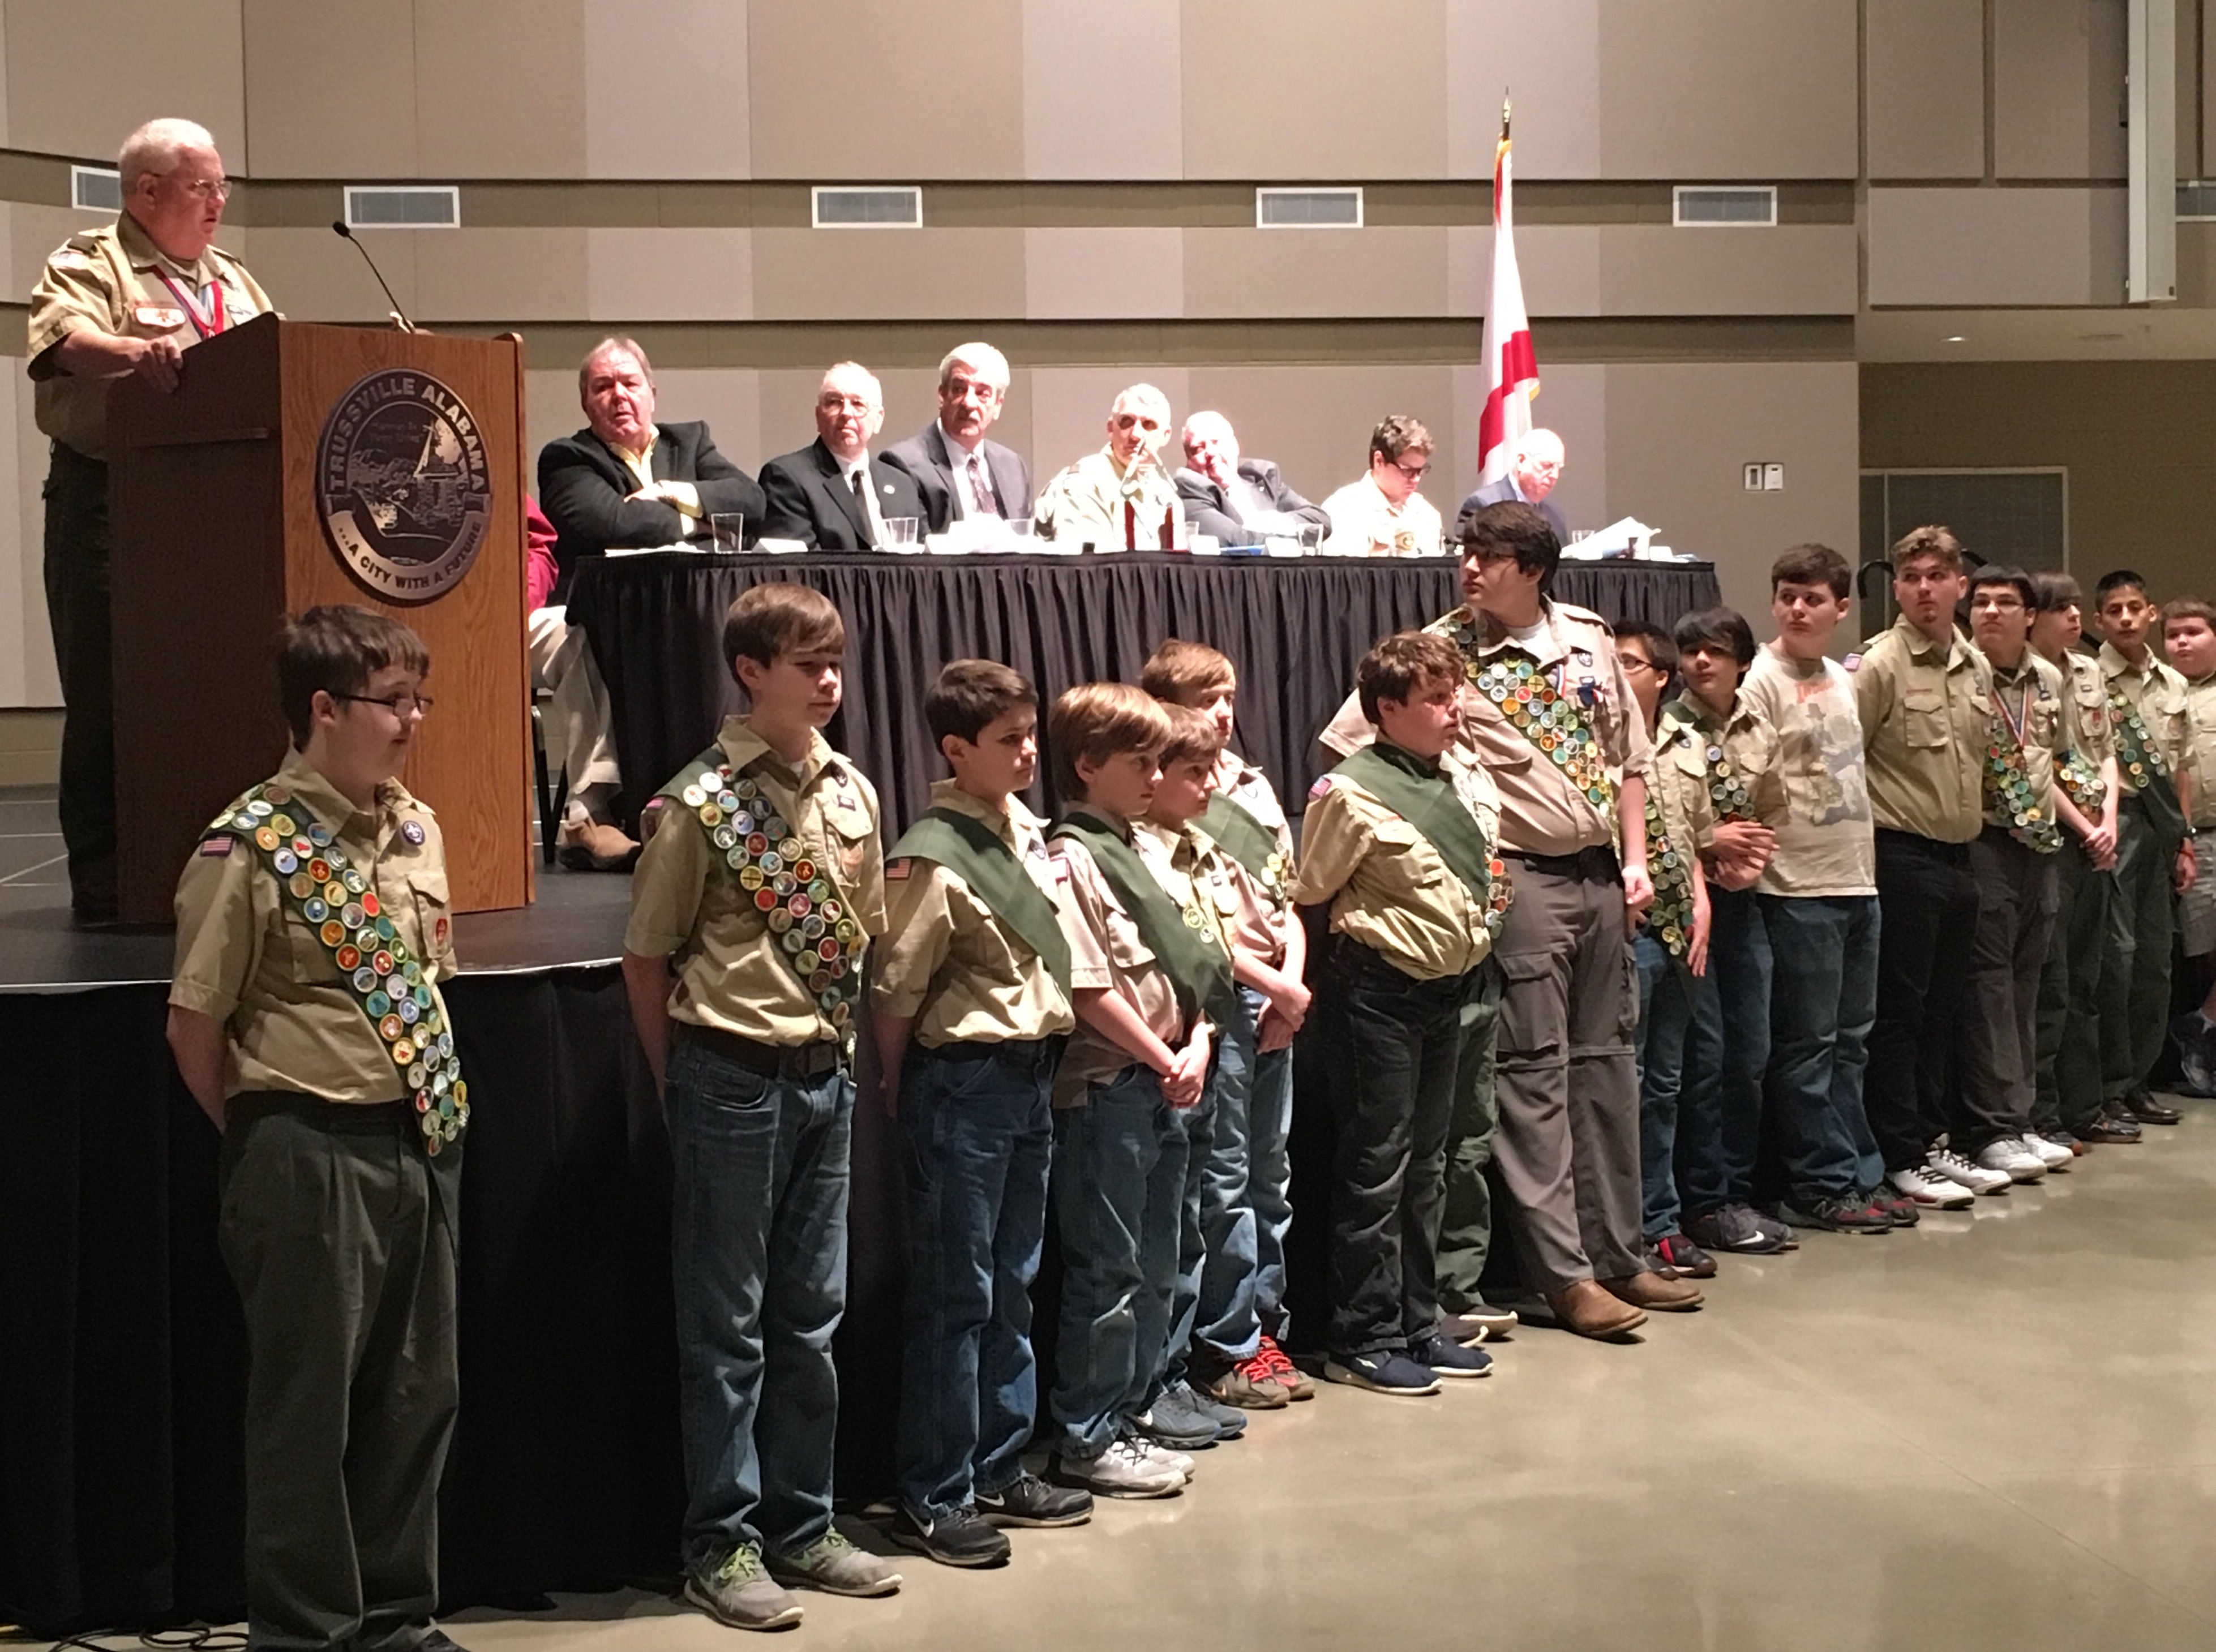 Pinson Boy Scout Troop 14, second oldest in the country, recognized at mayor’s breakfast